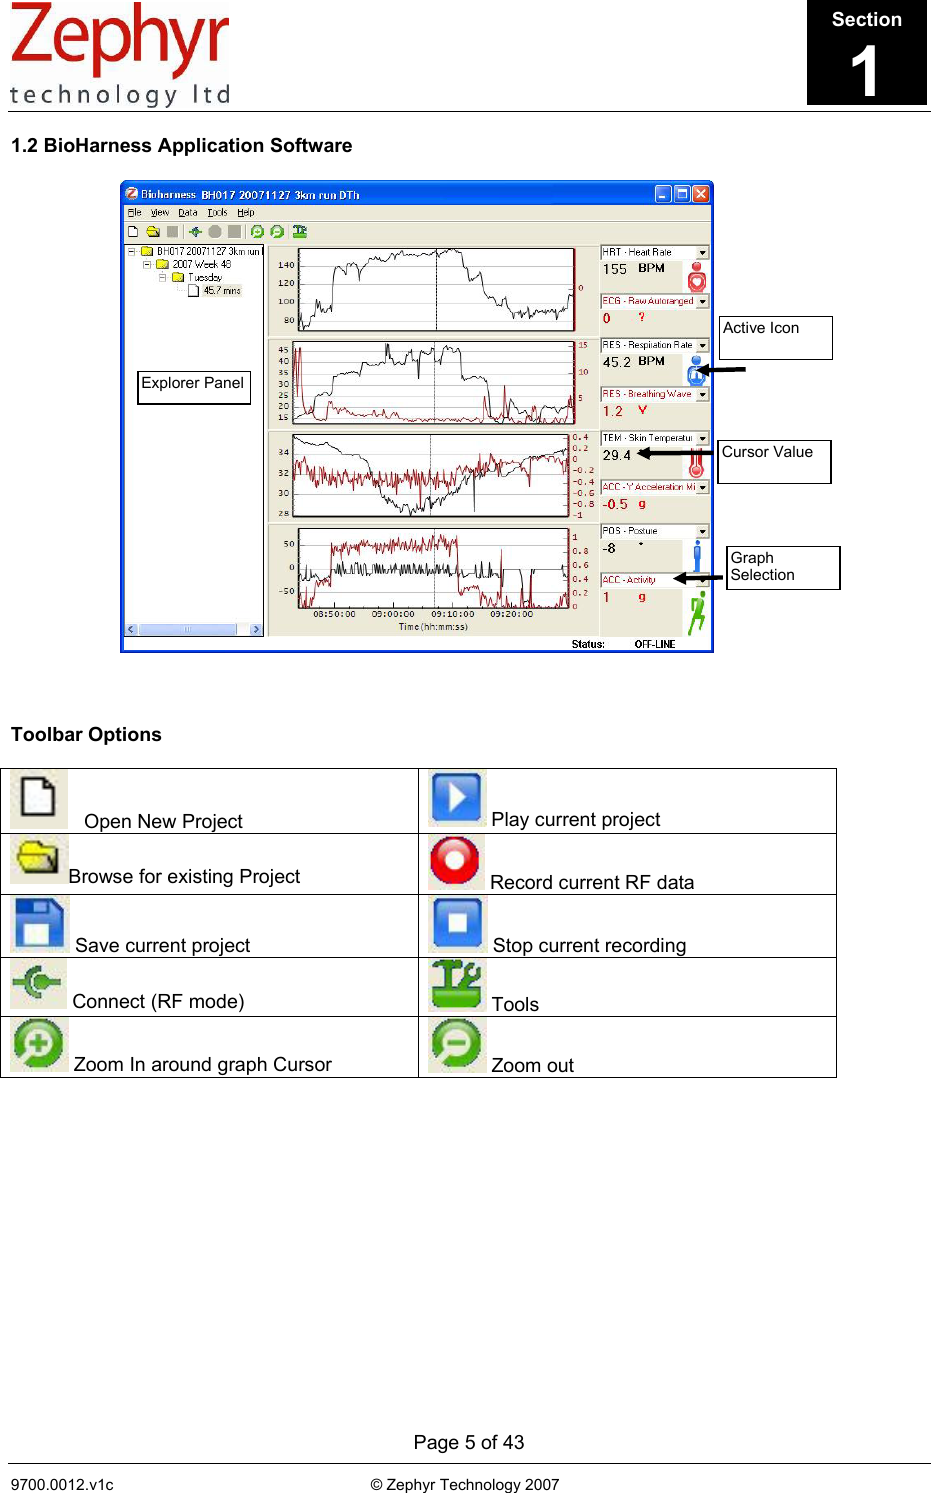      Page 5 of 43 9700.0012.v1c                                                           © Zephyr Technology 2007                                                              1.2 BioHarness Application Software      Toolbar Options     Open New Project   Play current project Browse for existing Project   Record current RF data  Save current project   Stop current recording  Connect (RF mode)   Tools  Zoom In around graph Cursor   Zoom out Explorer Panel Graph Selection Cursor Value Active Icon Section1